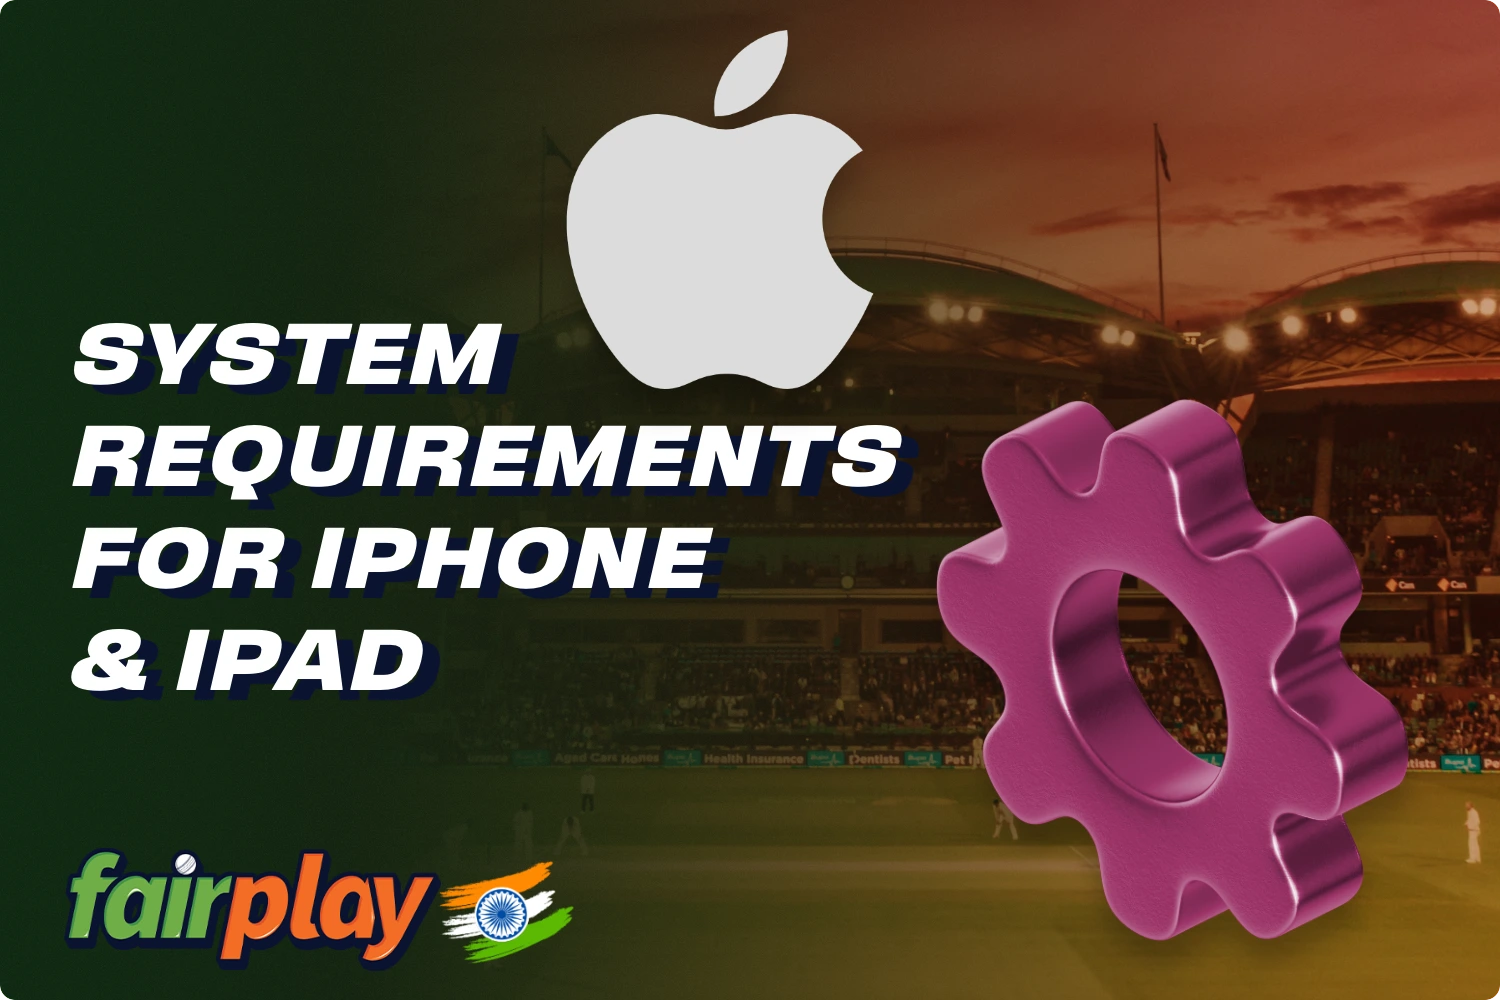 There are minimum system requirements of the Fairplay app for iPhone and iPad